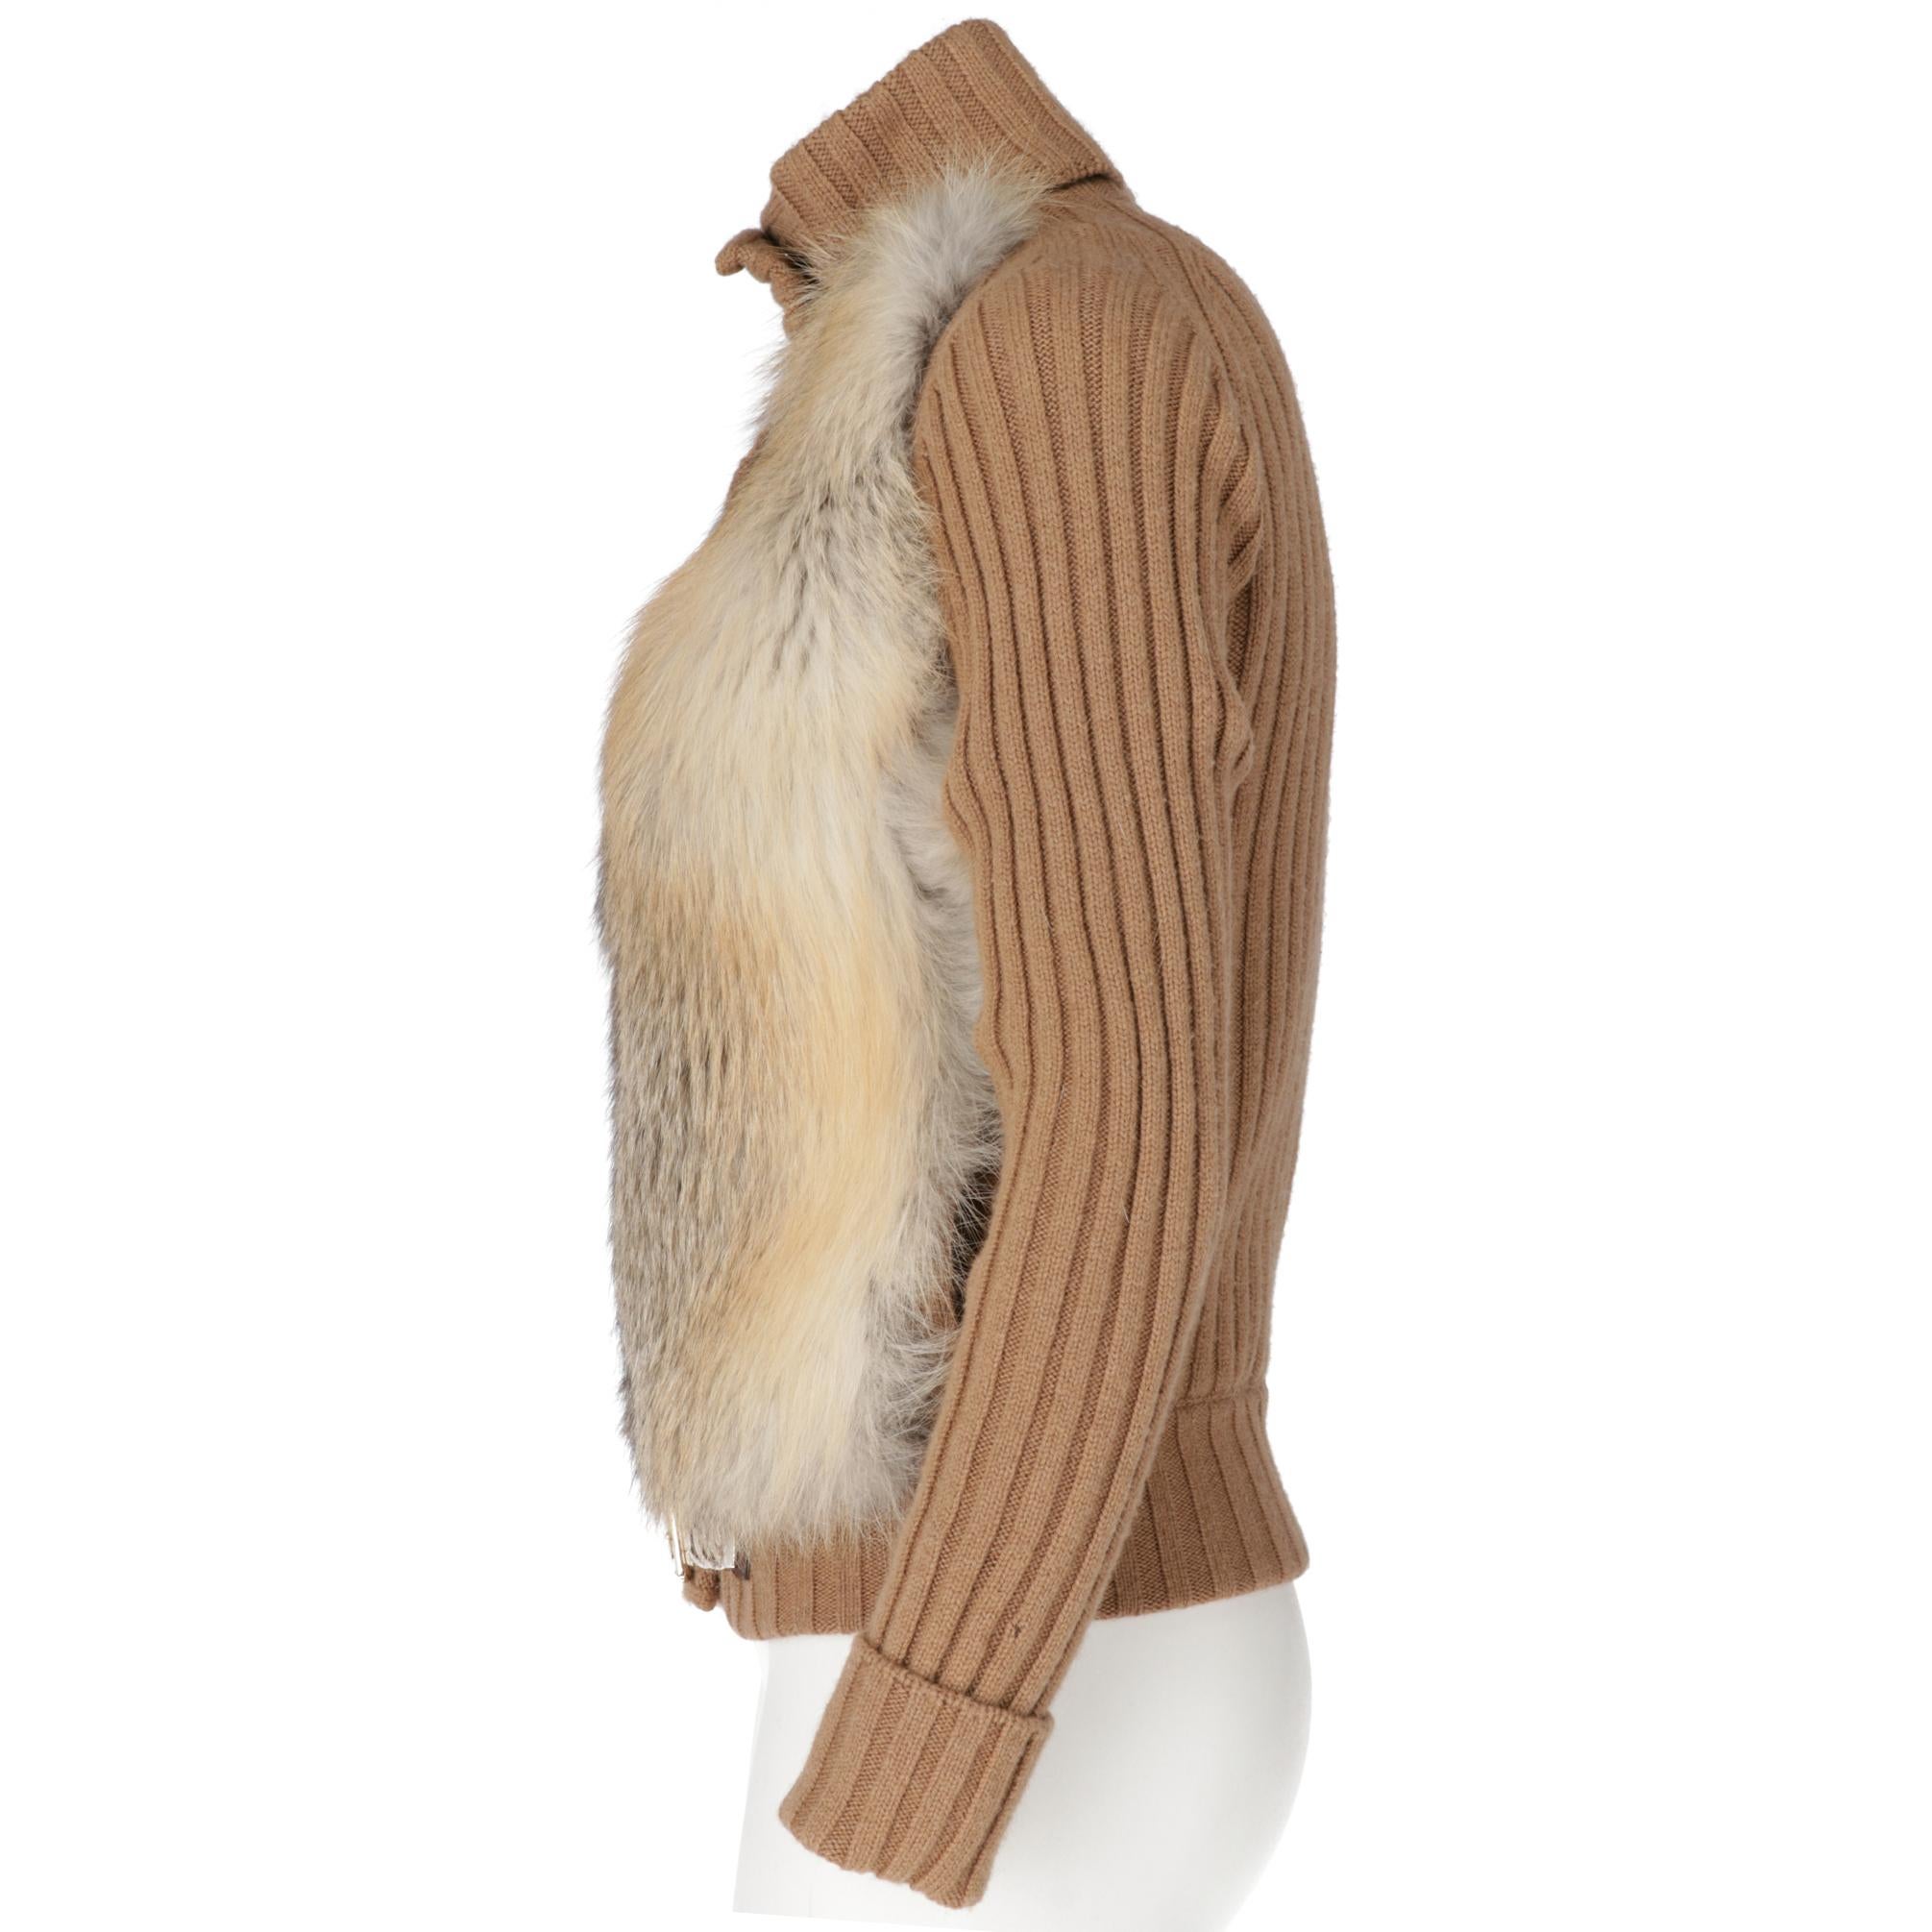 Gucci cardigan in beige camel wool with fox fur applied on the front, with long sleeves, high collar, front closure with hidden double slider zip and press buttons, pockets inserted in the seam, logoed belt in golden metal. Lined interior.

The